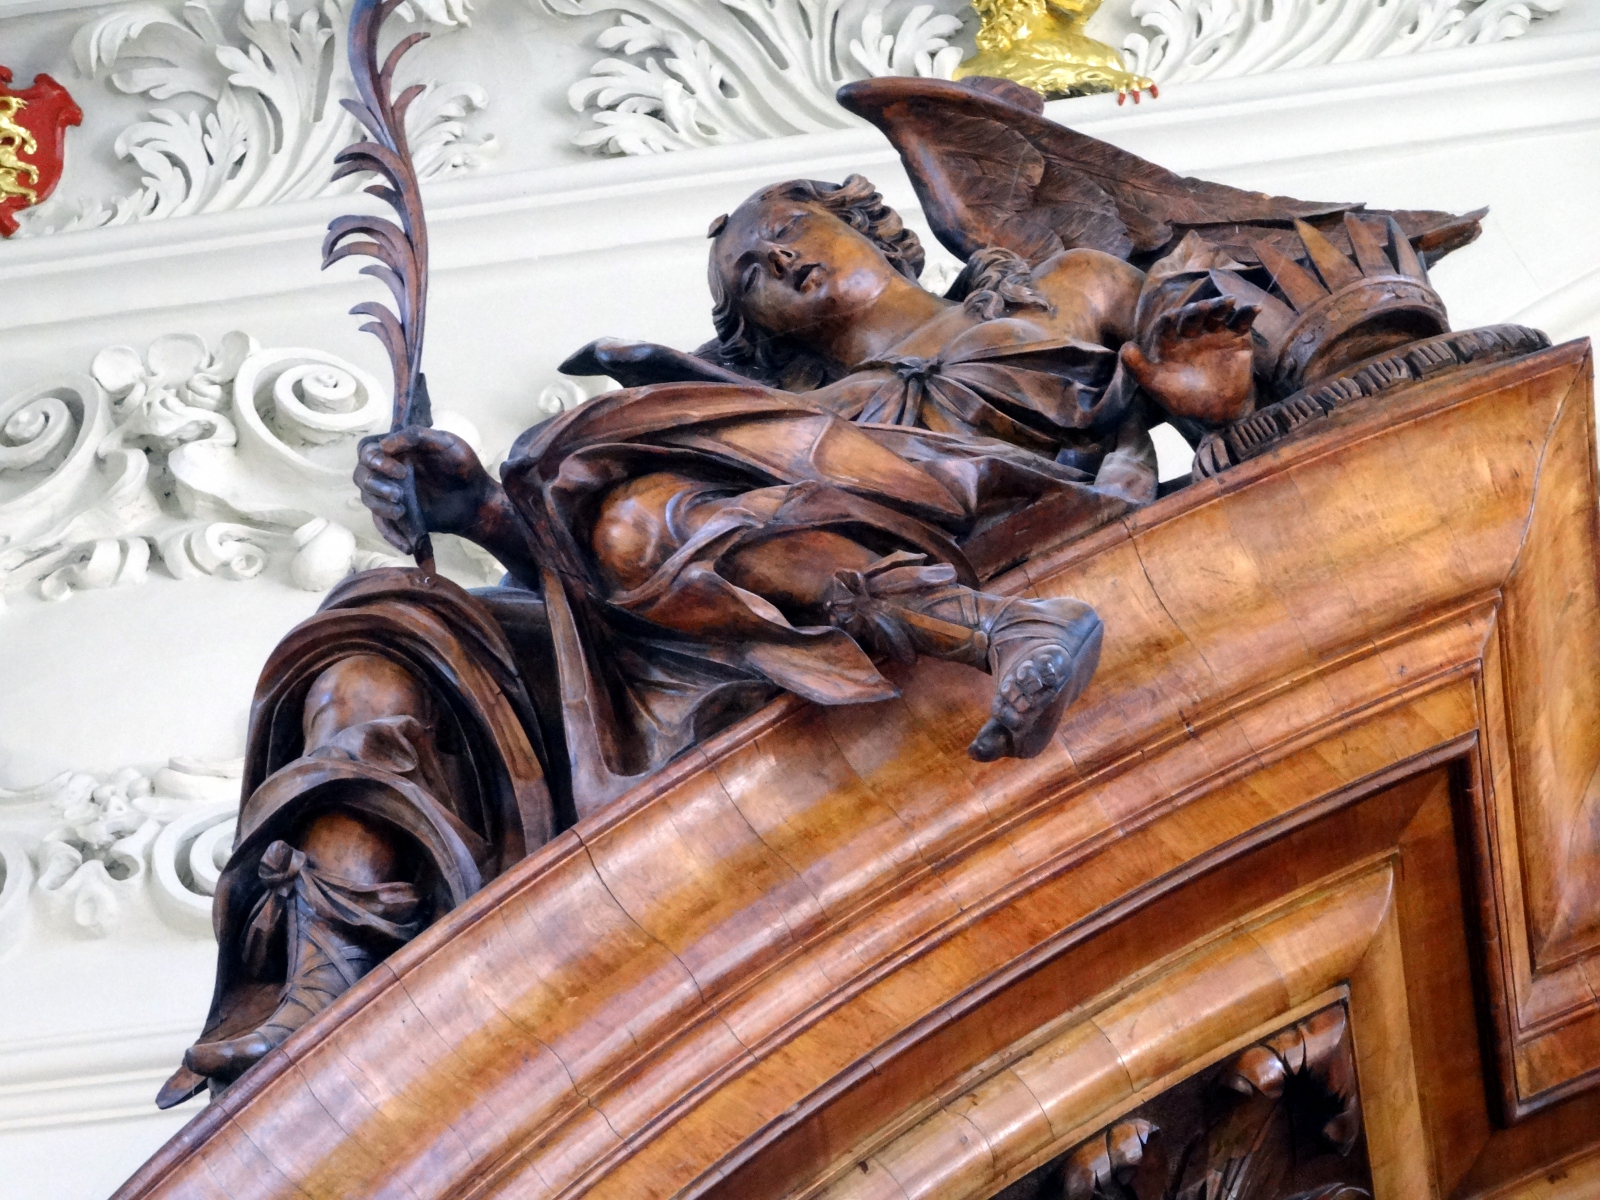 photo of figure atop the reredos - north